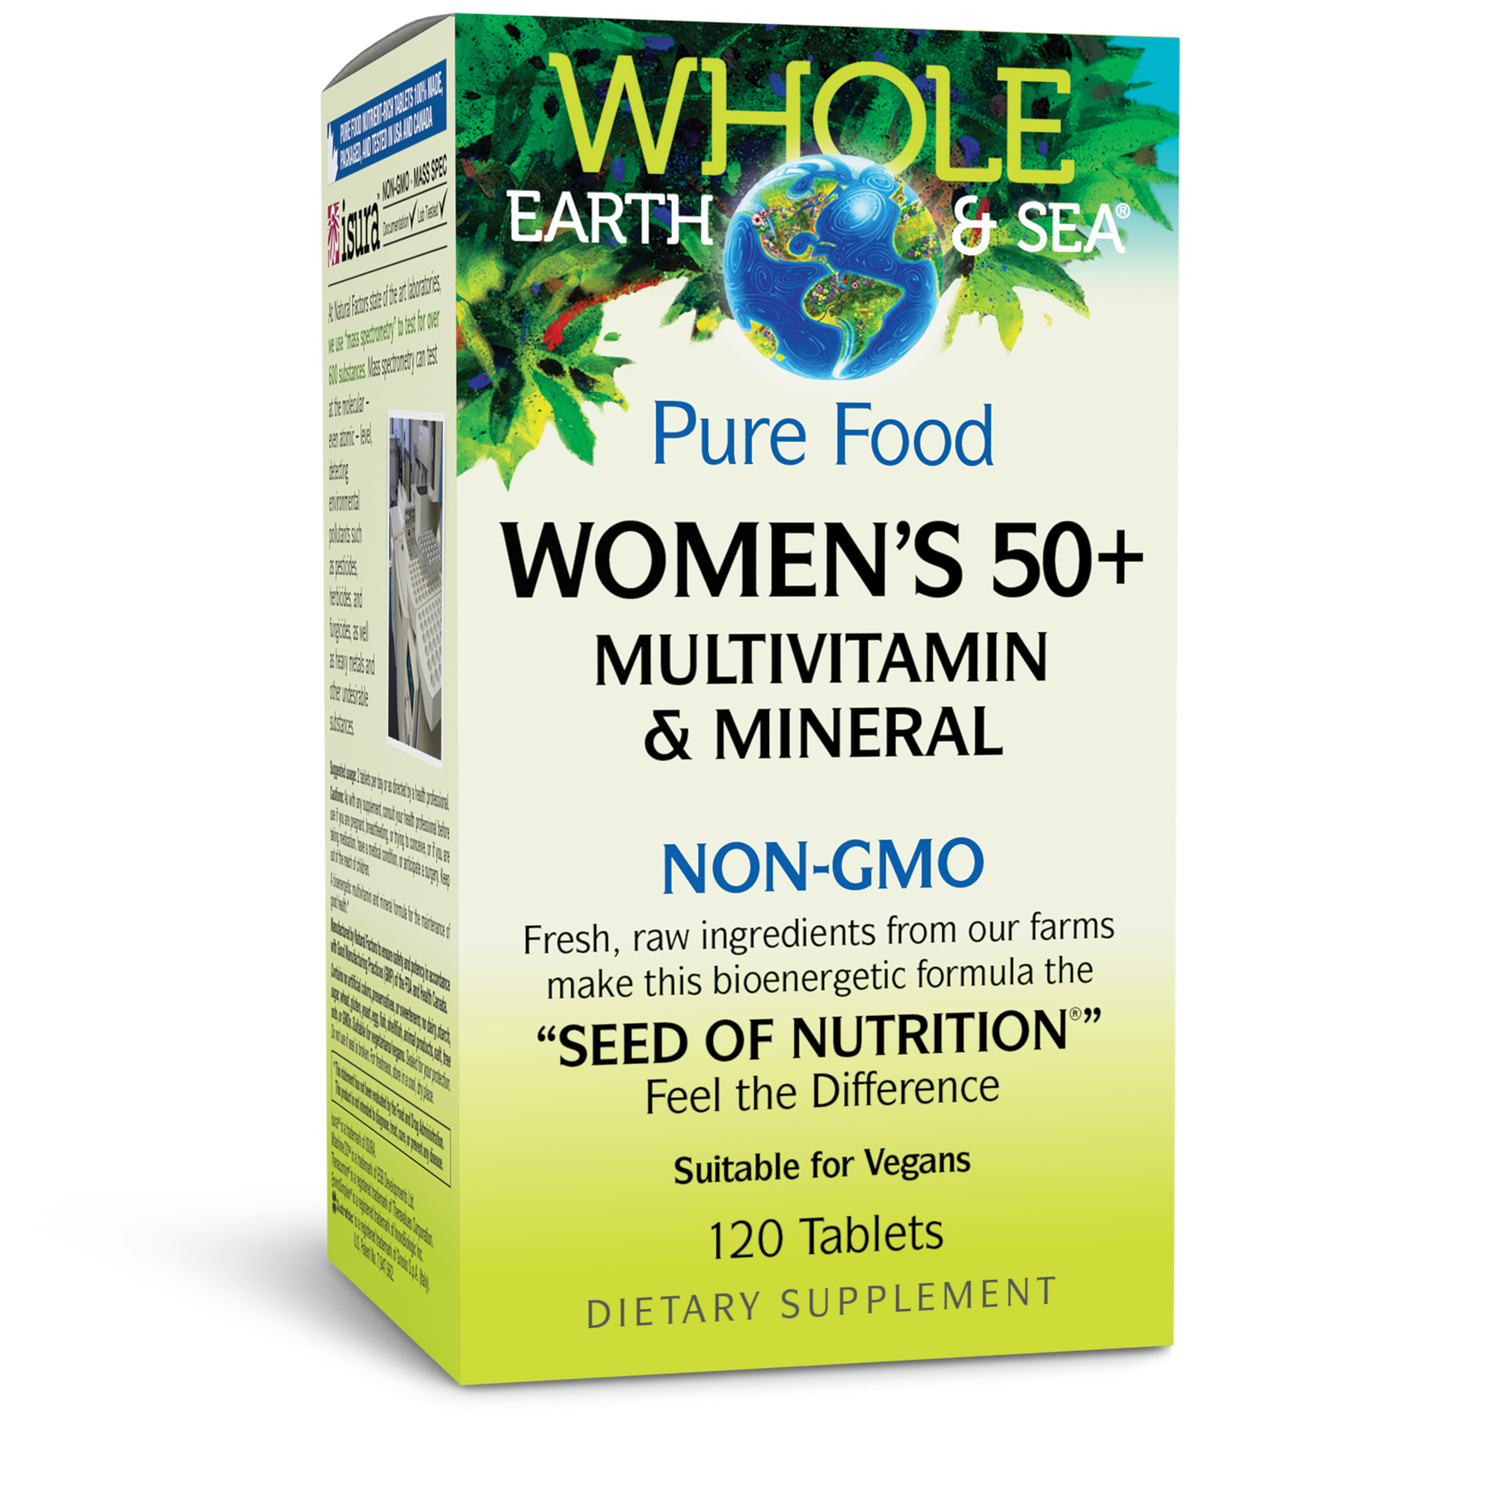 Women's 50+ Multivitamin & Mineral for Whole Earth & Sea® |variant|hi-res|35519U